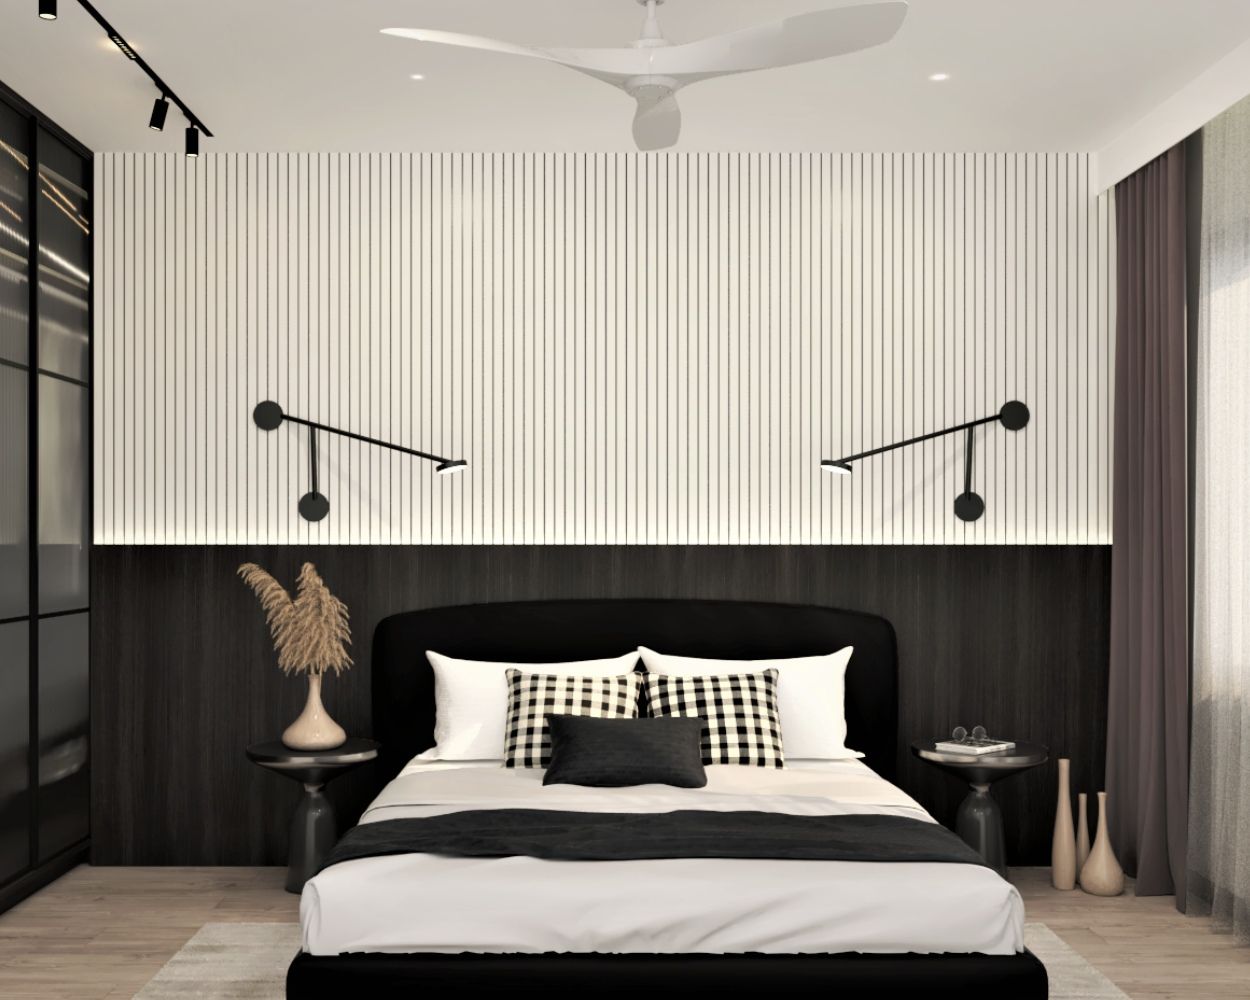 Modern Wall Design With White Fluted Panelling And Dark Grey Laminated Wall